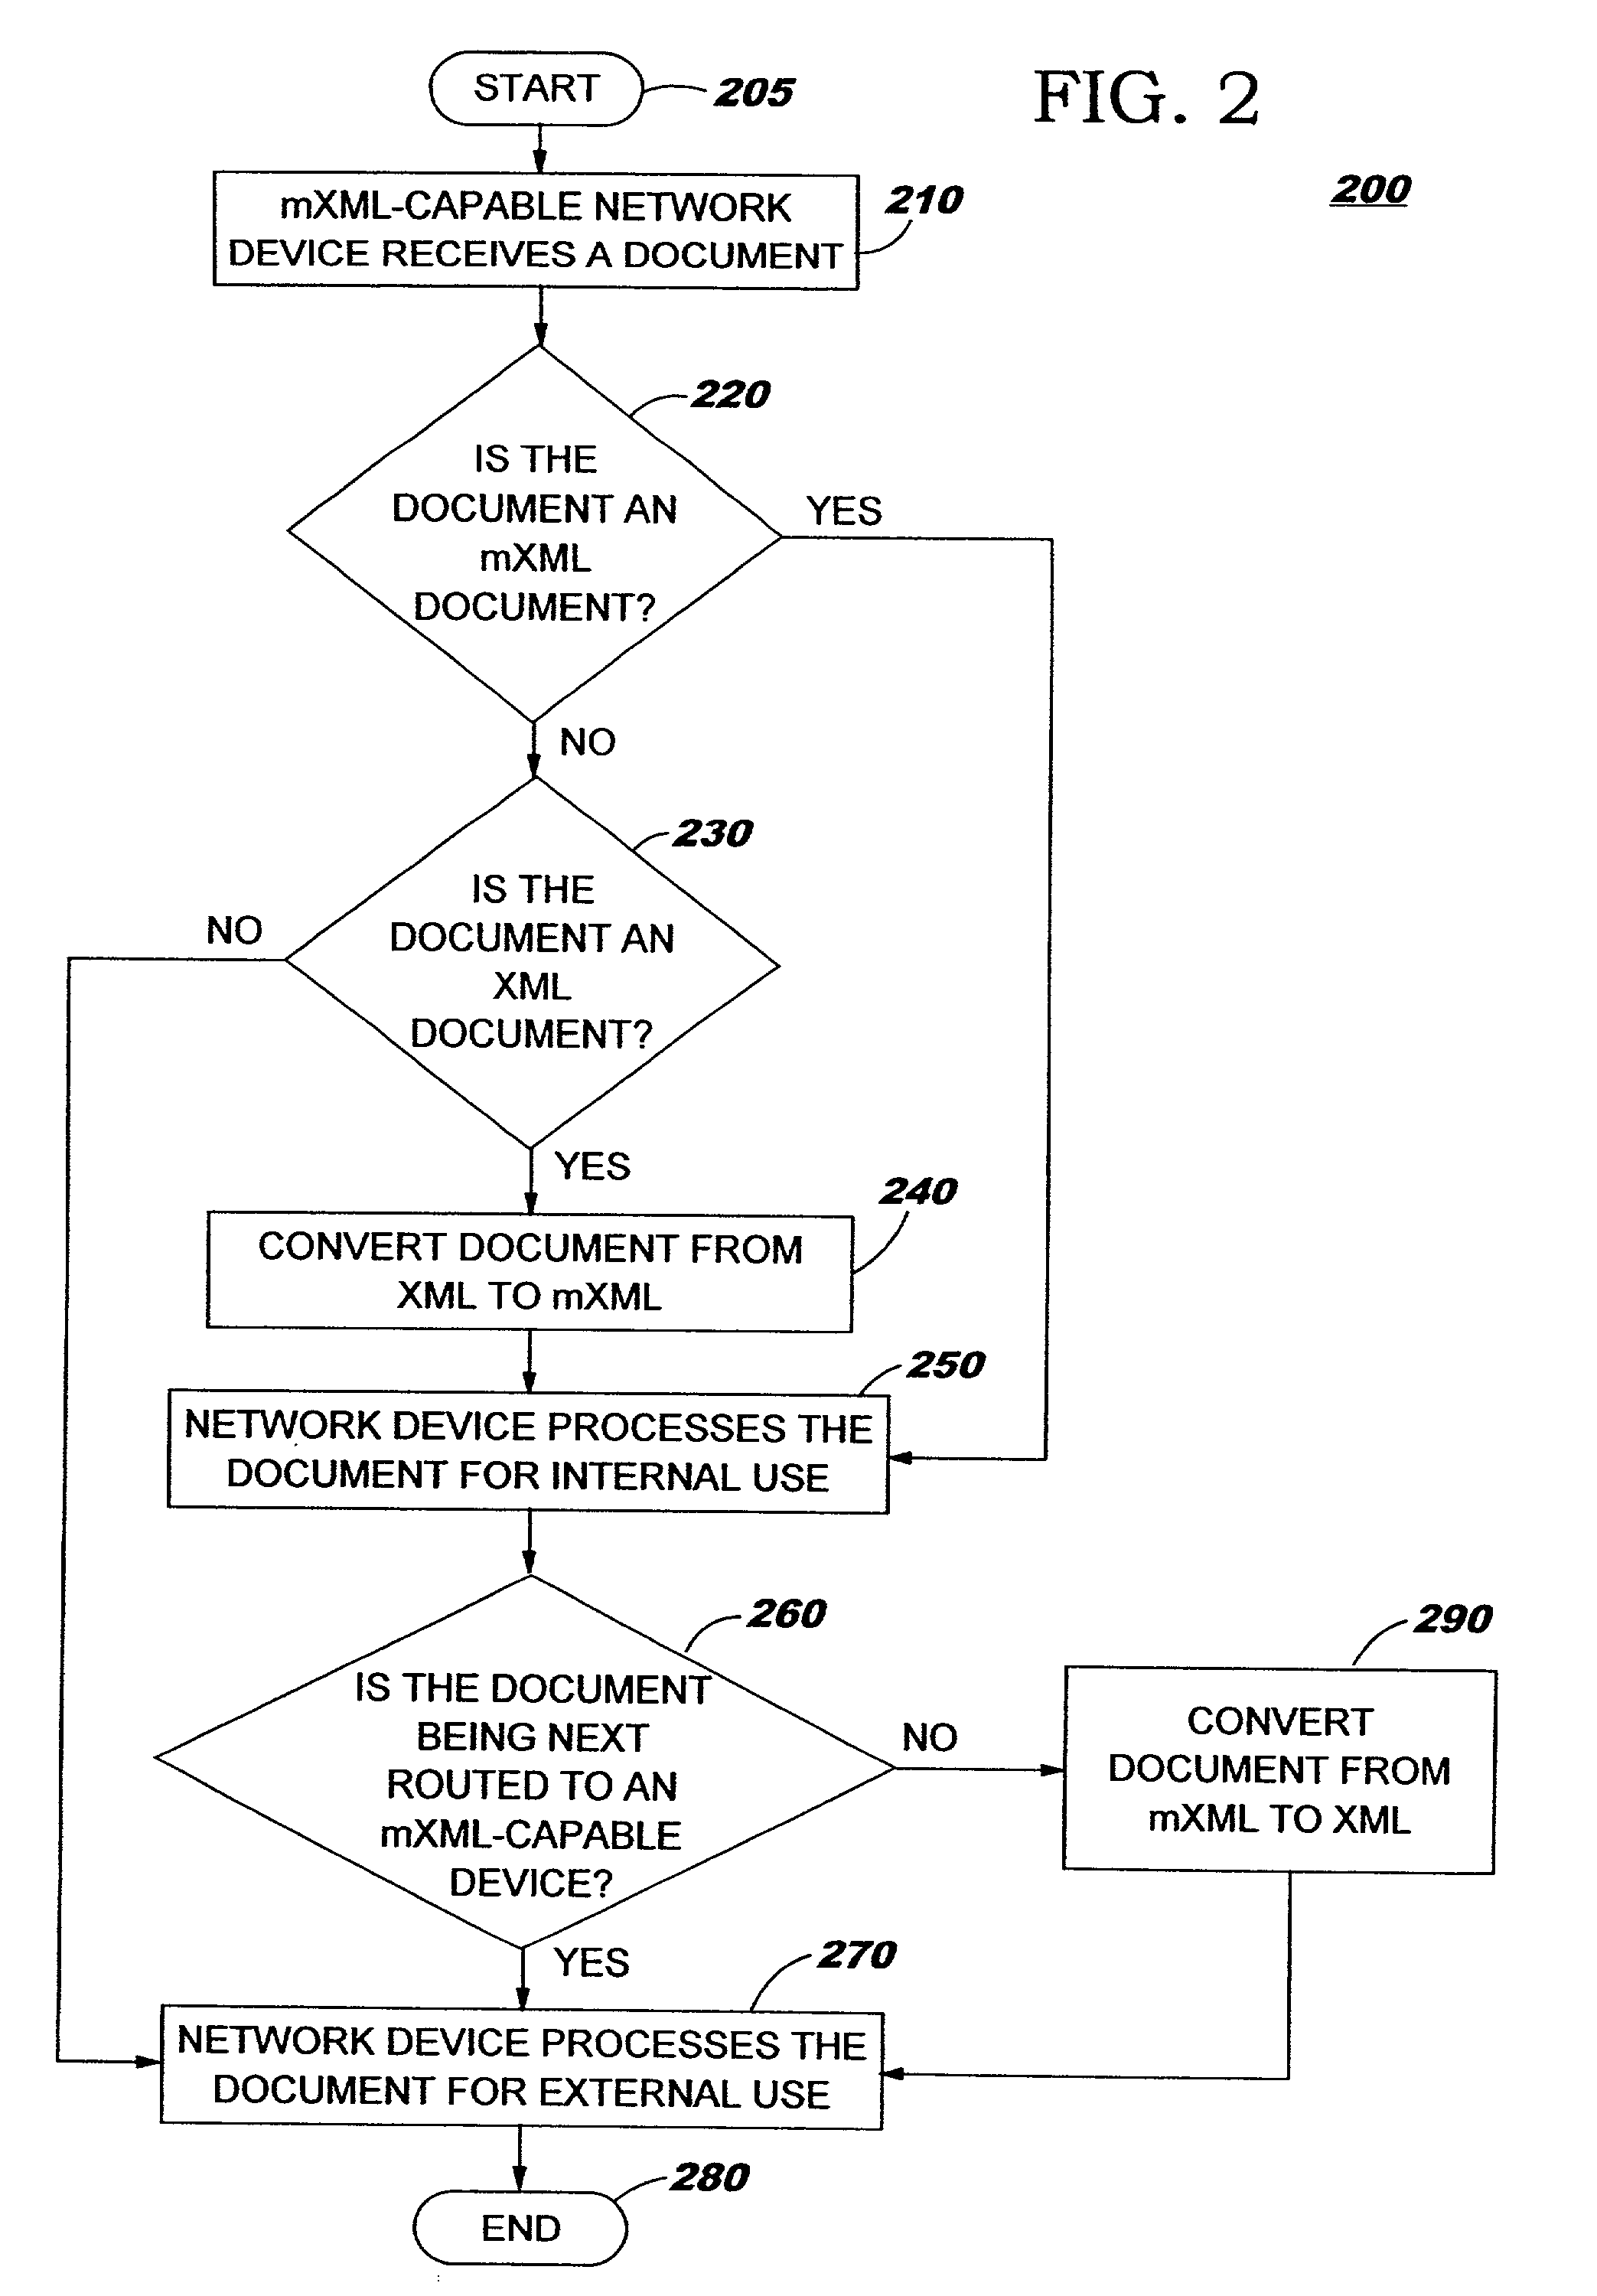 Conversion of documents between XML and processor efficient MXML in content based routing networks